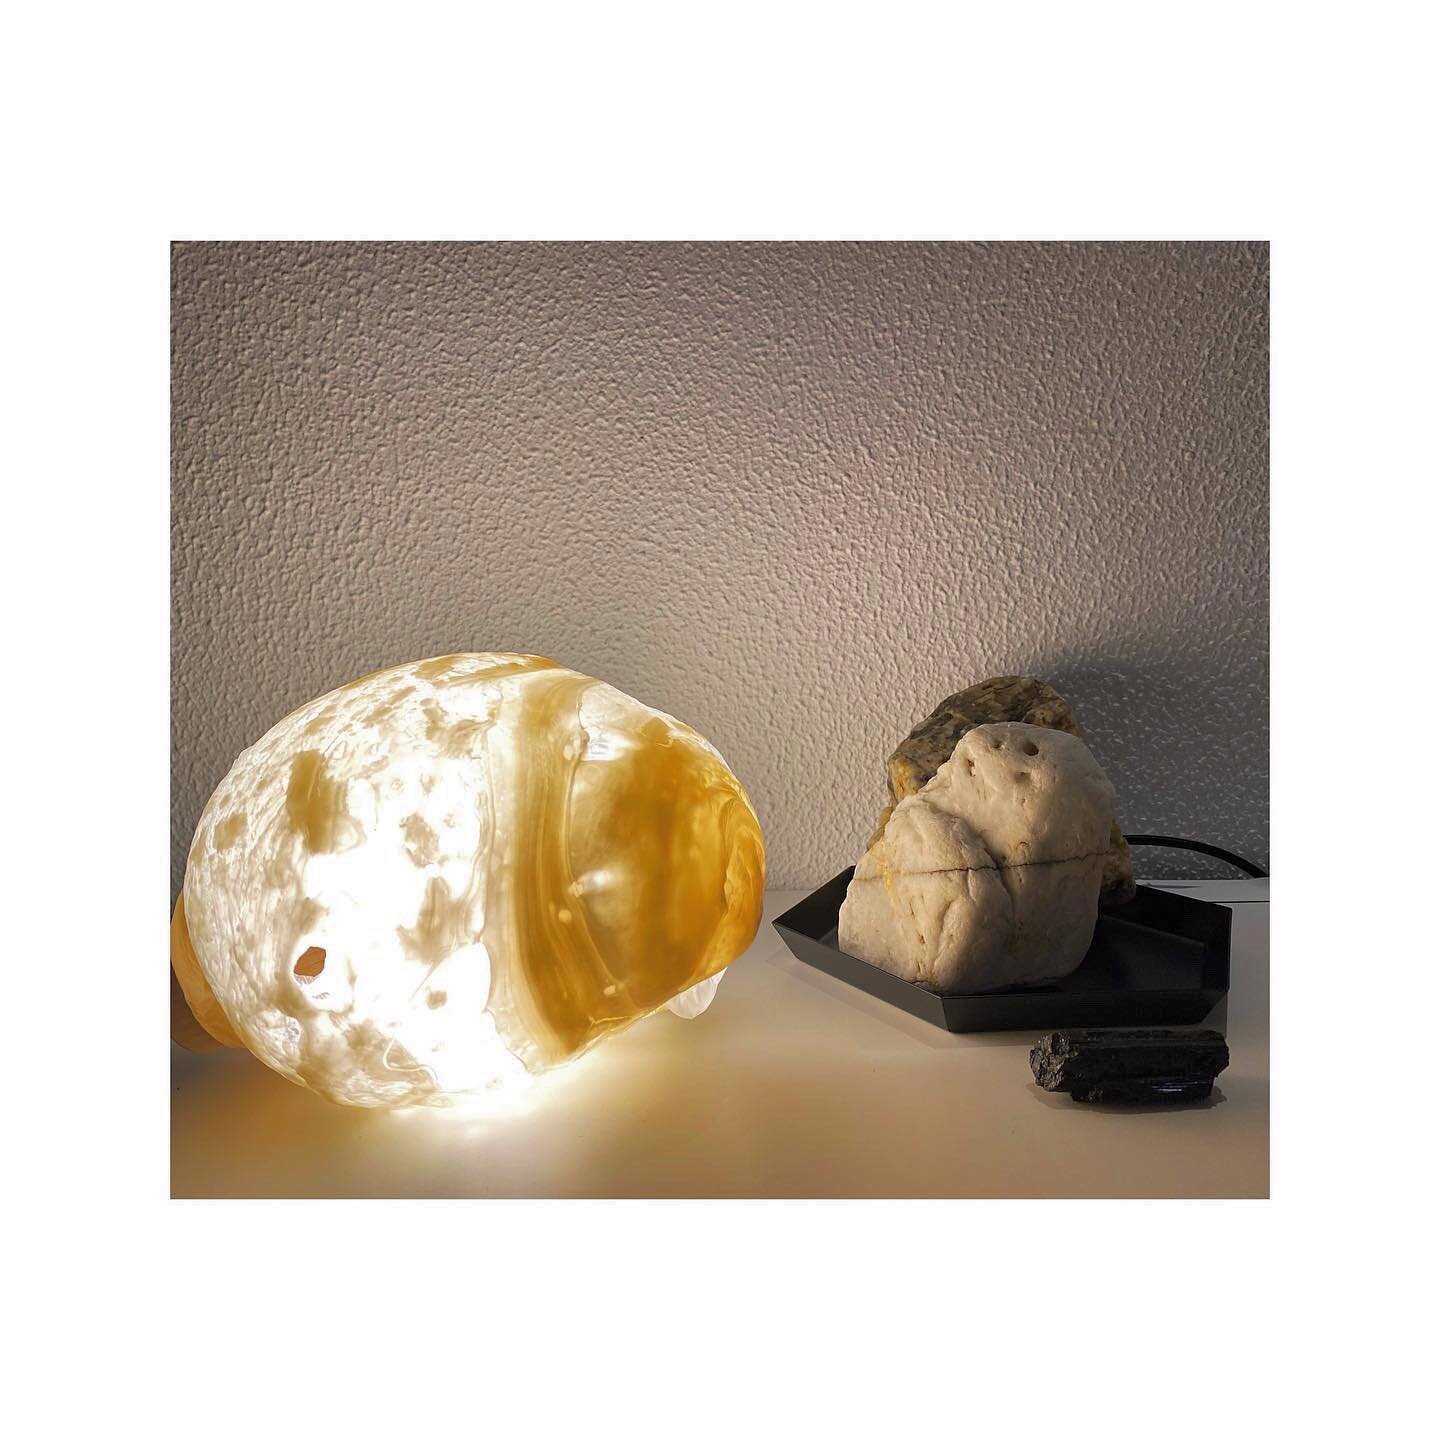 I&rsquo;m soooo in love about this @silva.sancho piece of art. The soft light shaped by those liquid shades calms me.  It reminds me a shell or a rock or a moon ... or a rock on the moon in a placenta shell ... 🤷&zwj;♀️ Definitely this LAMP rocks! .